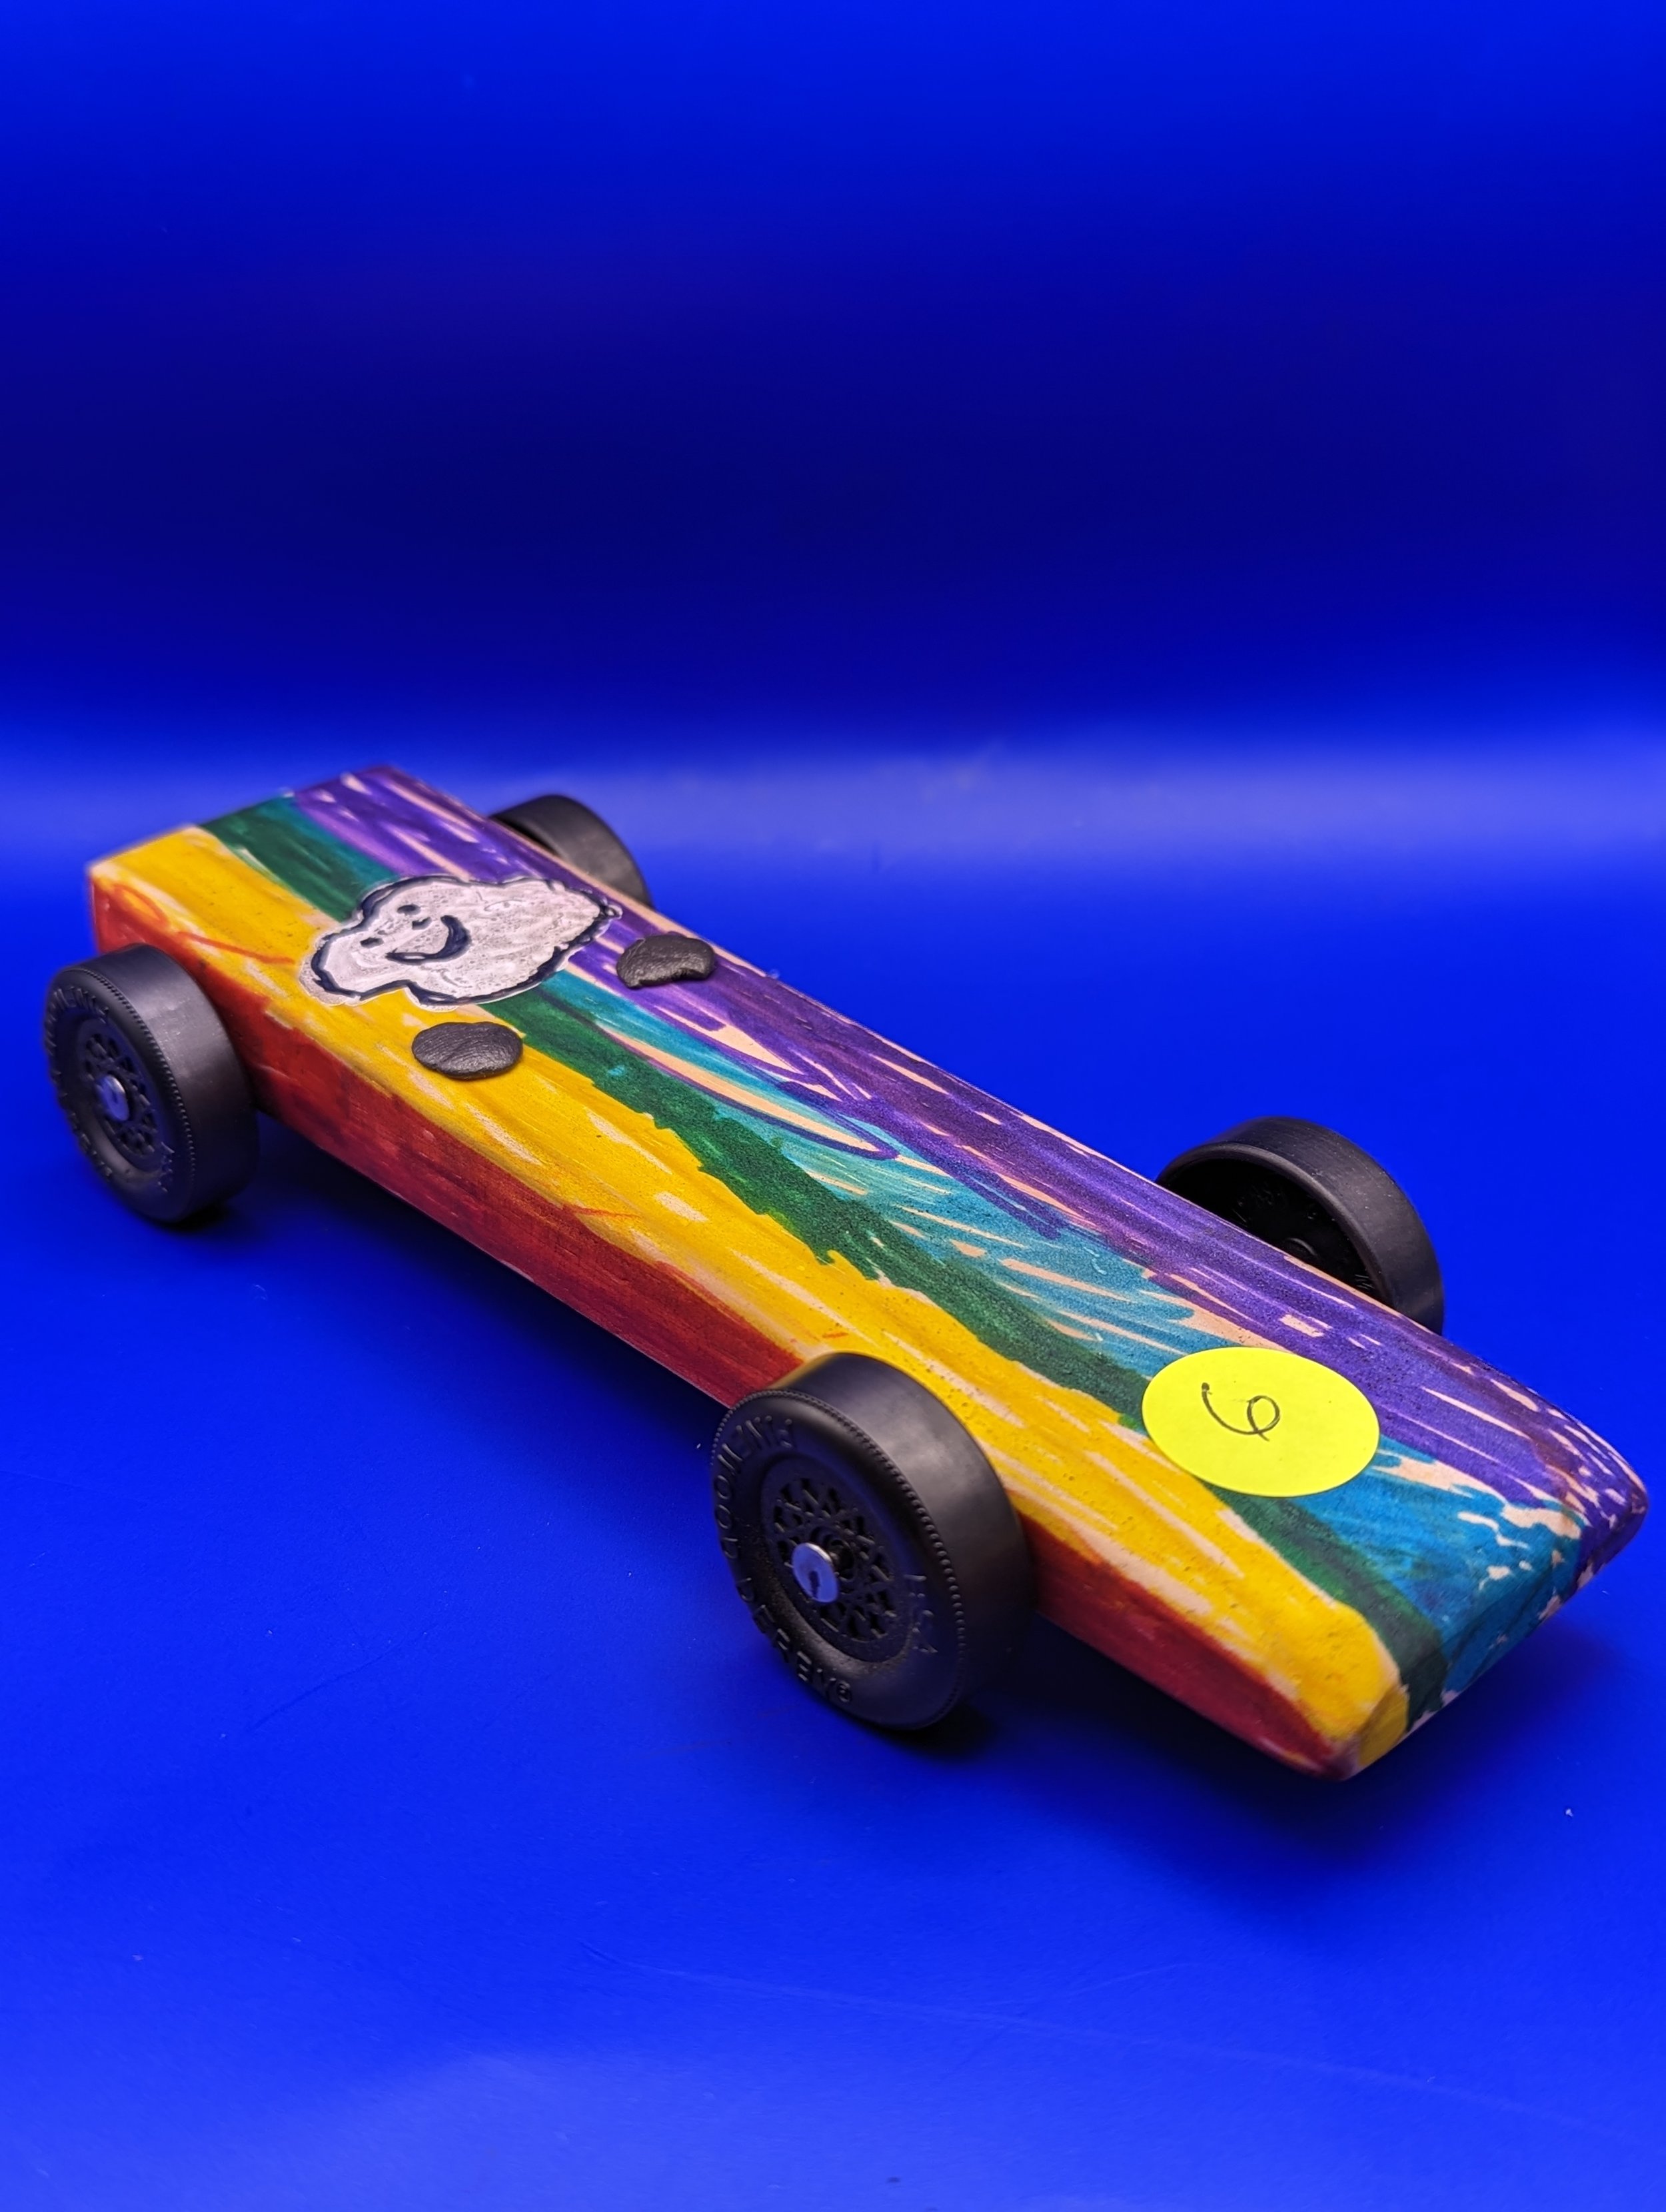 FAST!! Highly Tuned, Race Ready Pinewood Derby Car from Official BSA Boy  Scout / Cub Scout Derby Kit, Legal in ALL Races